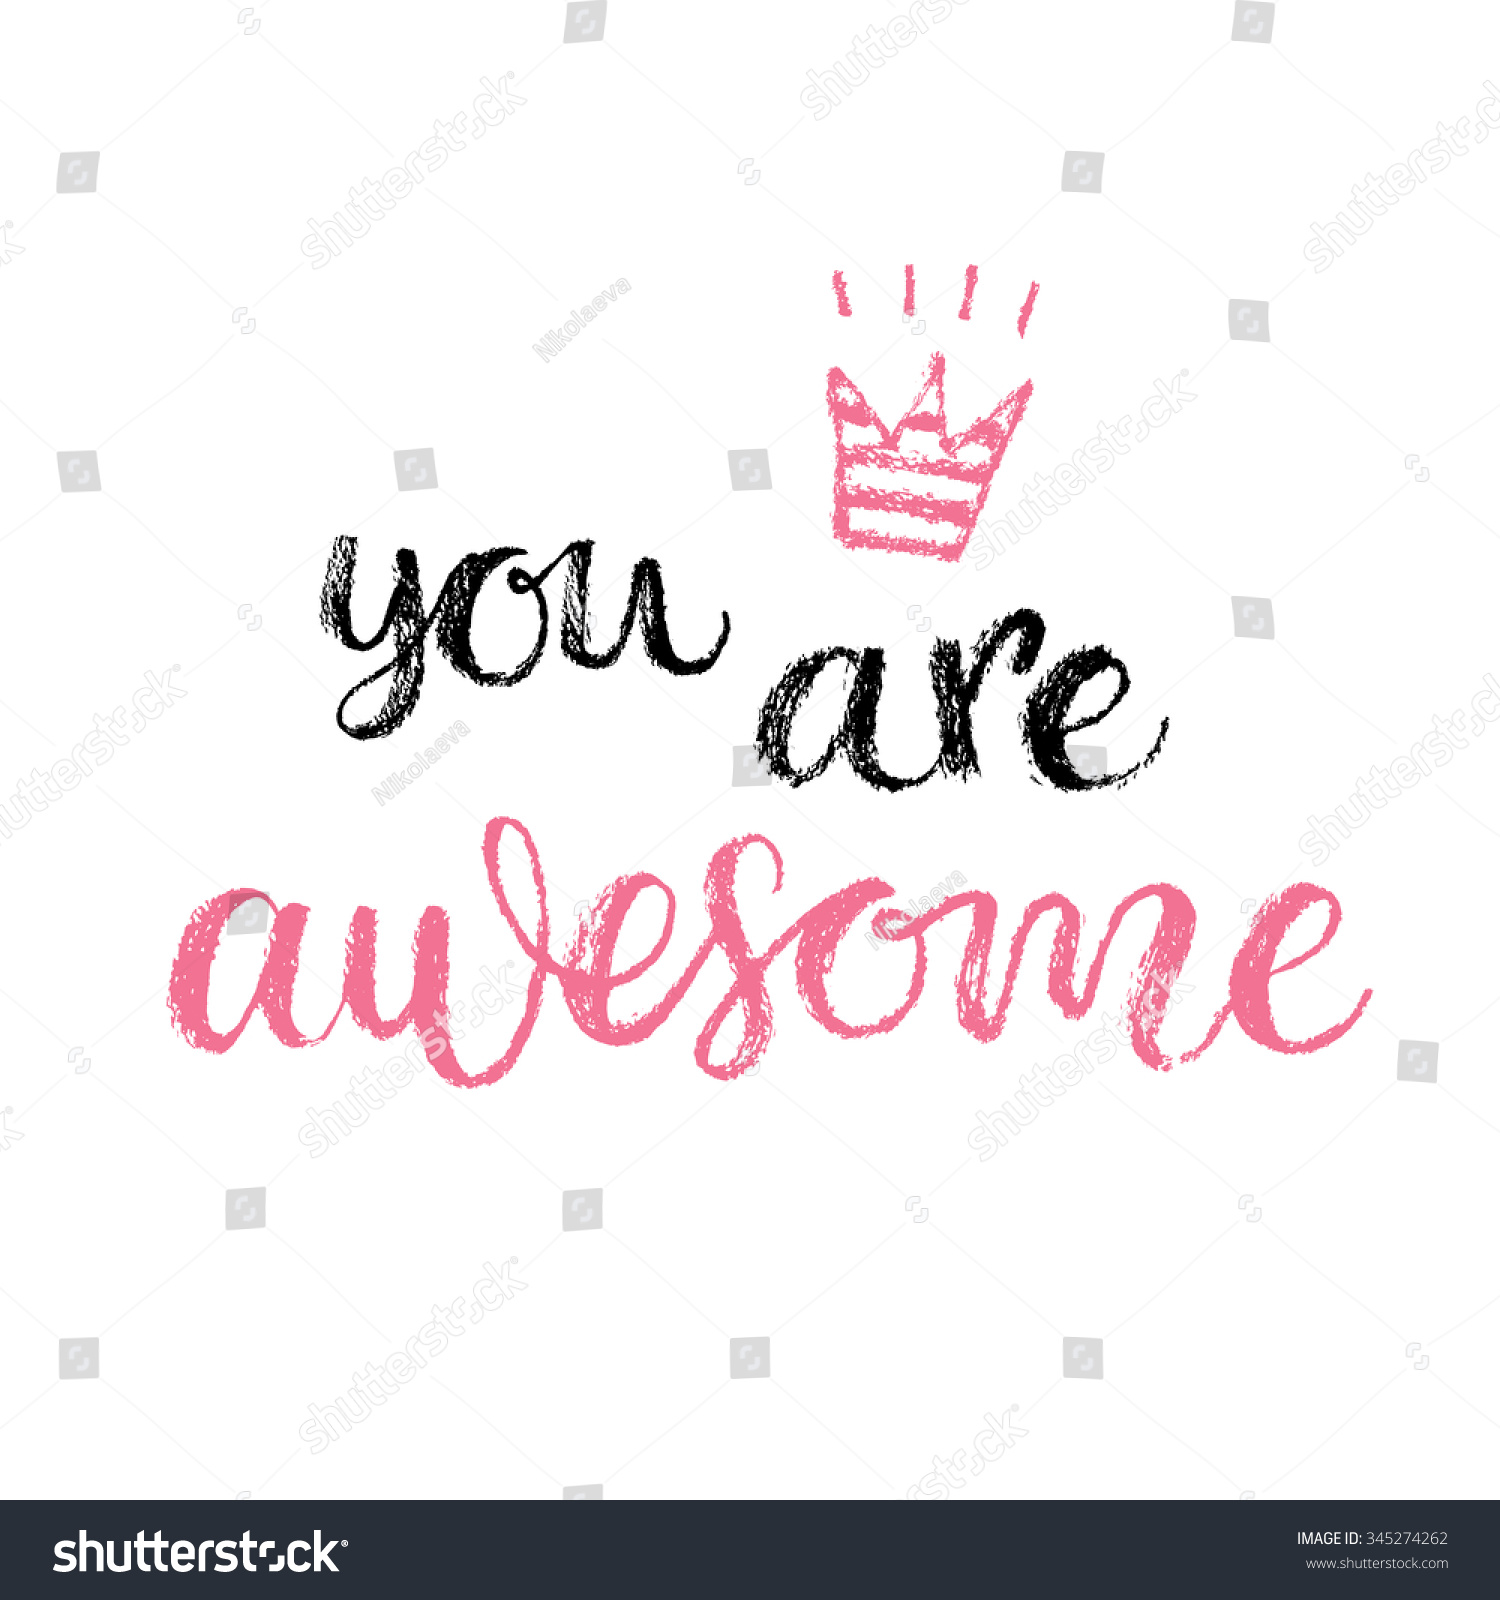 you are awesome clipart - photo #50